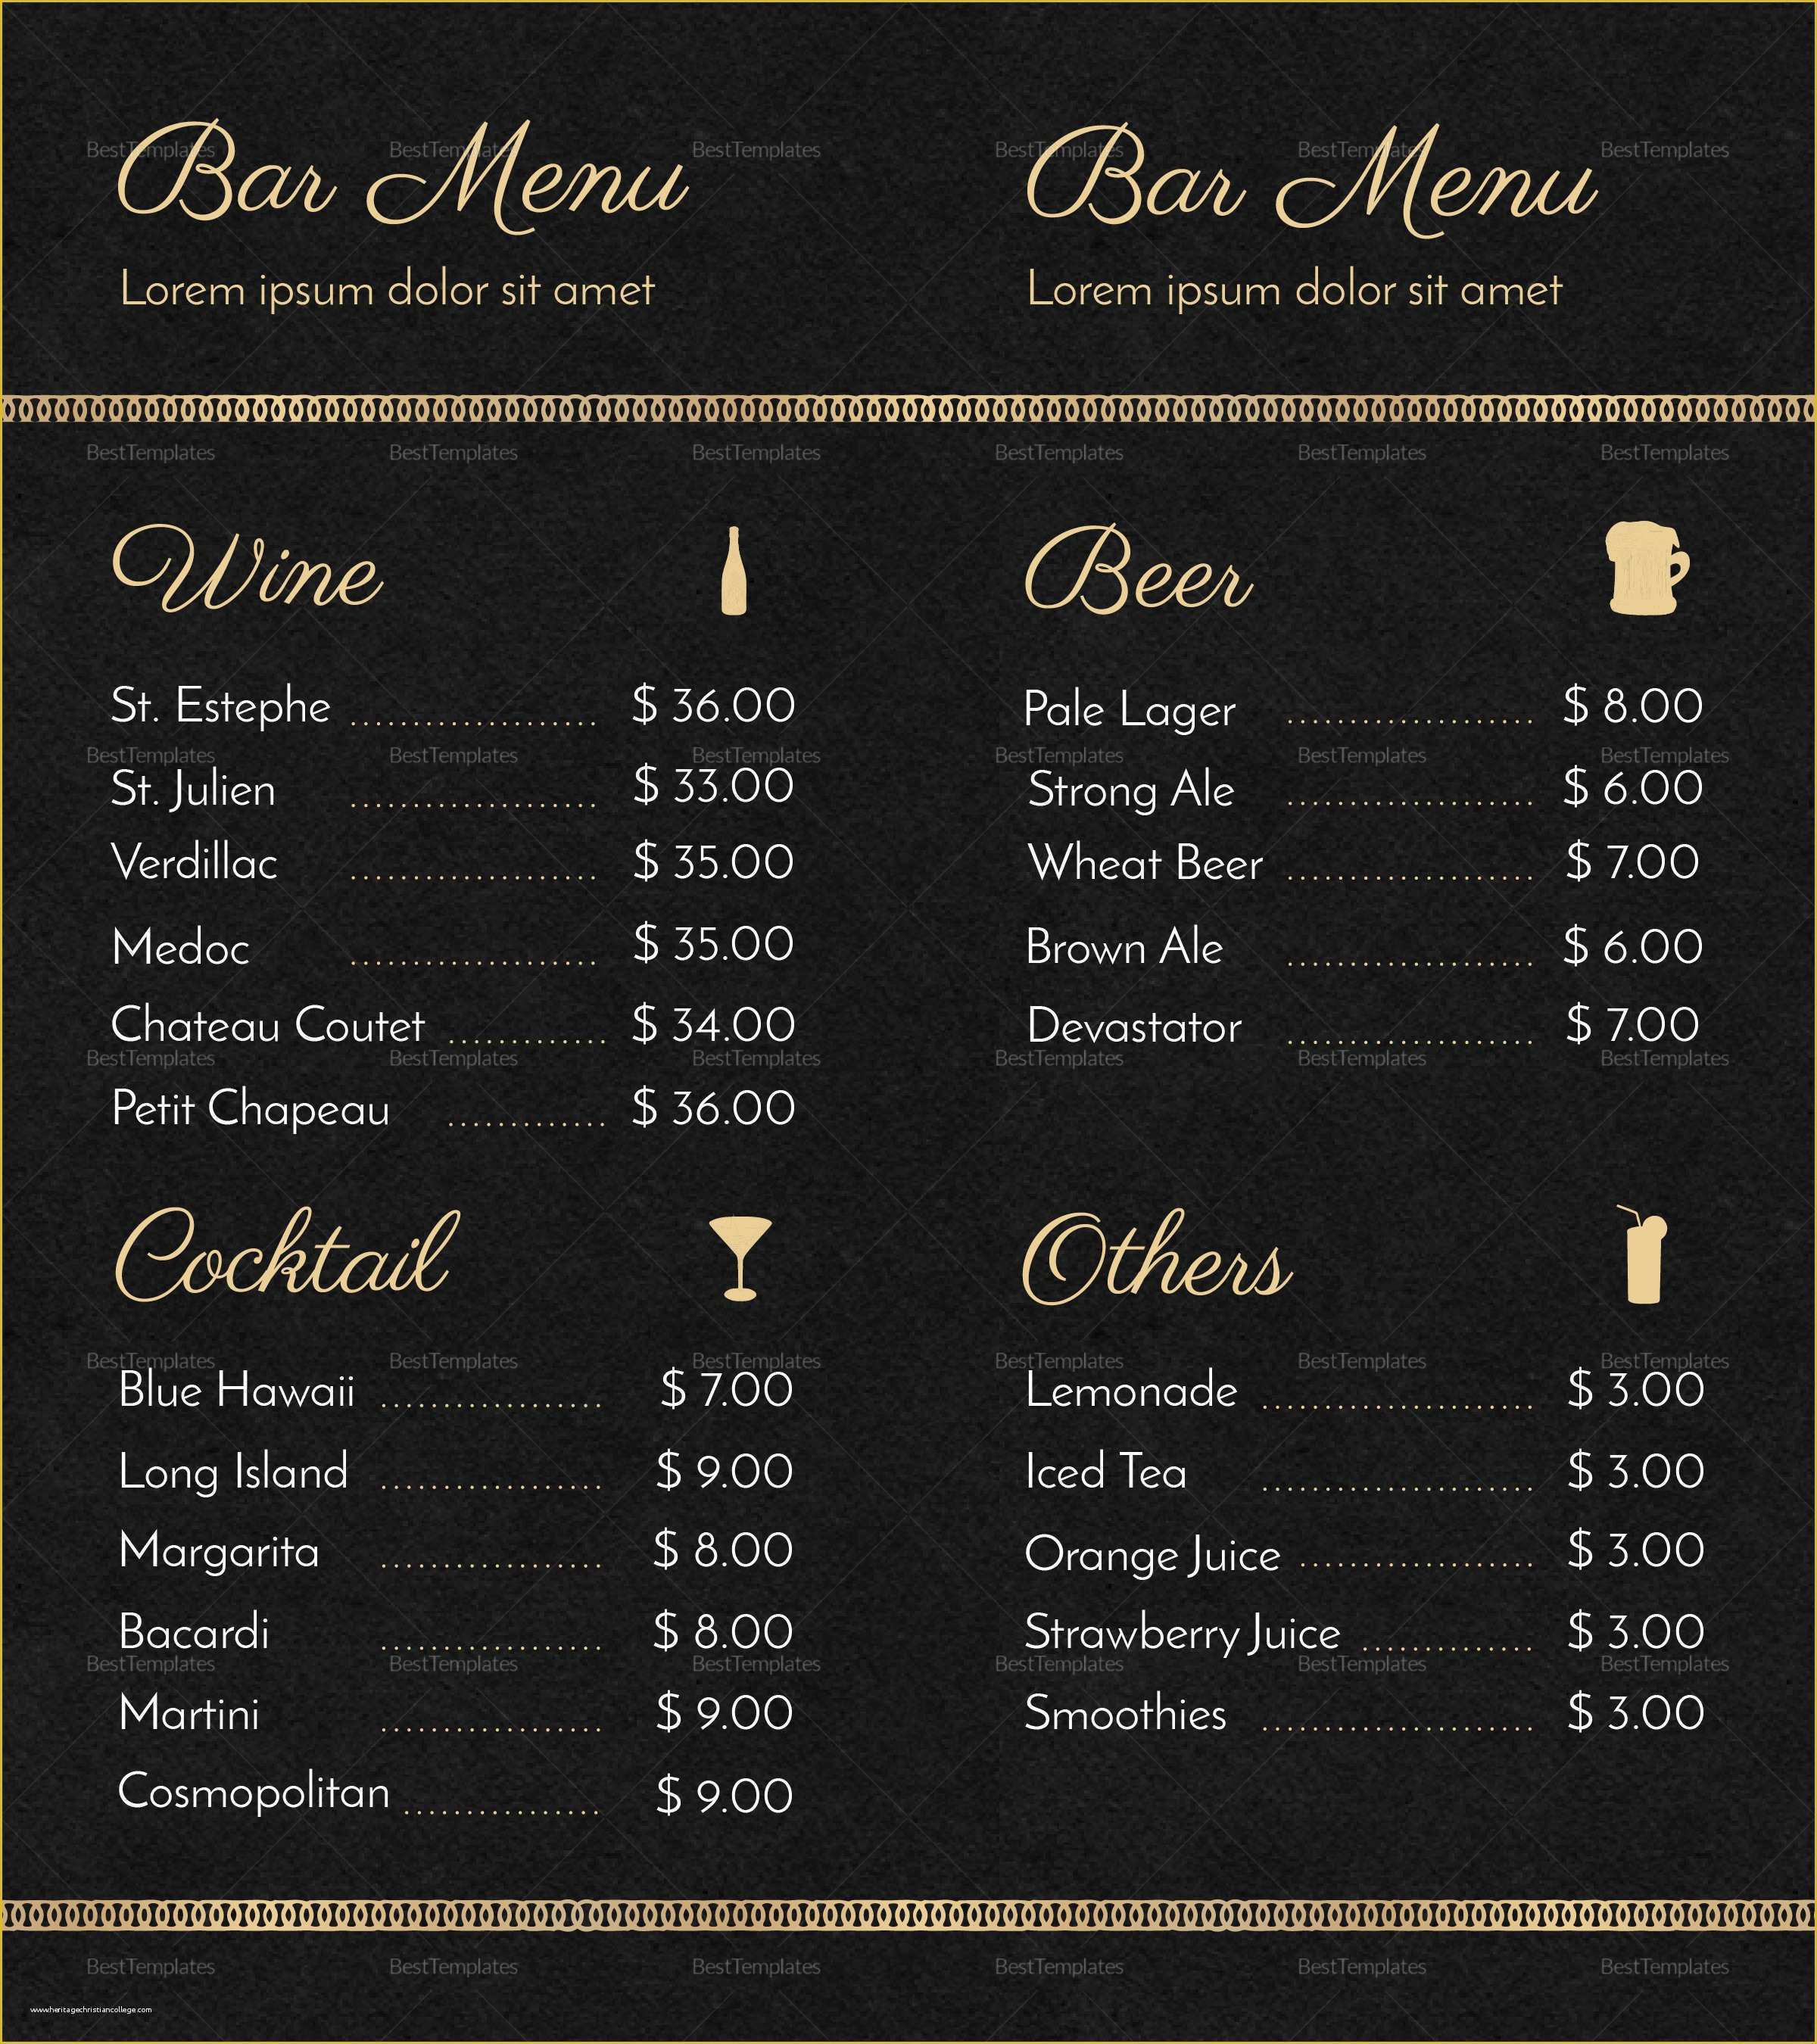 Free Bar Menu Templates for Word Of Bar Menu Design Template In Psd Word Publisher